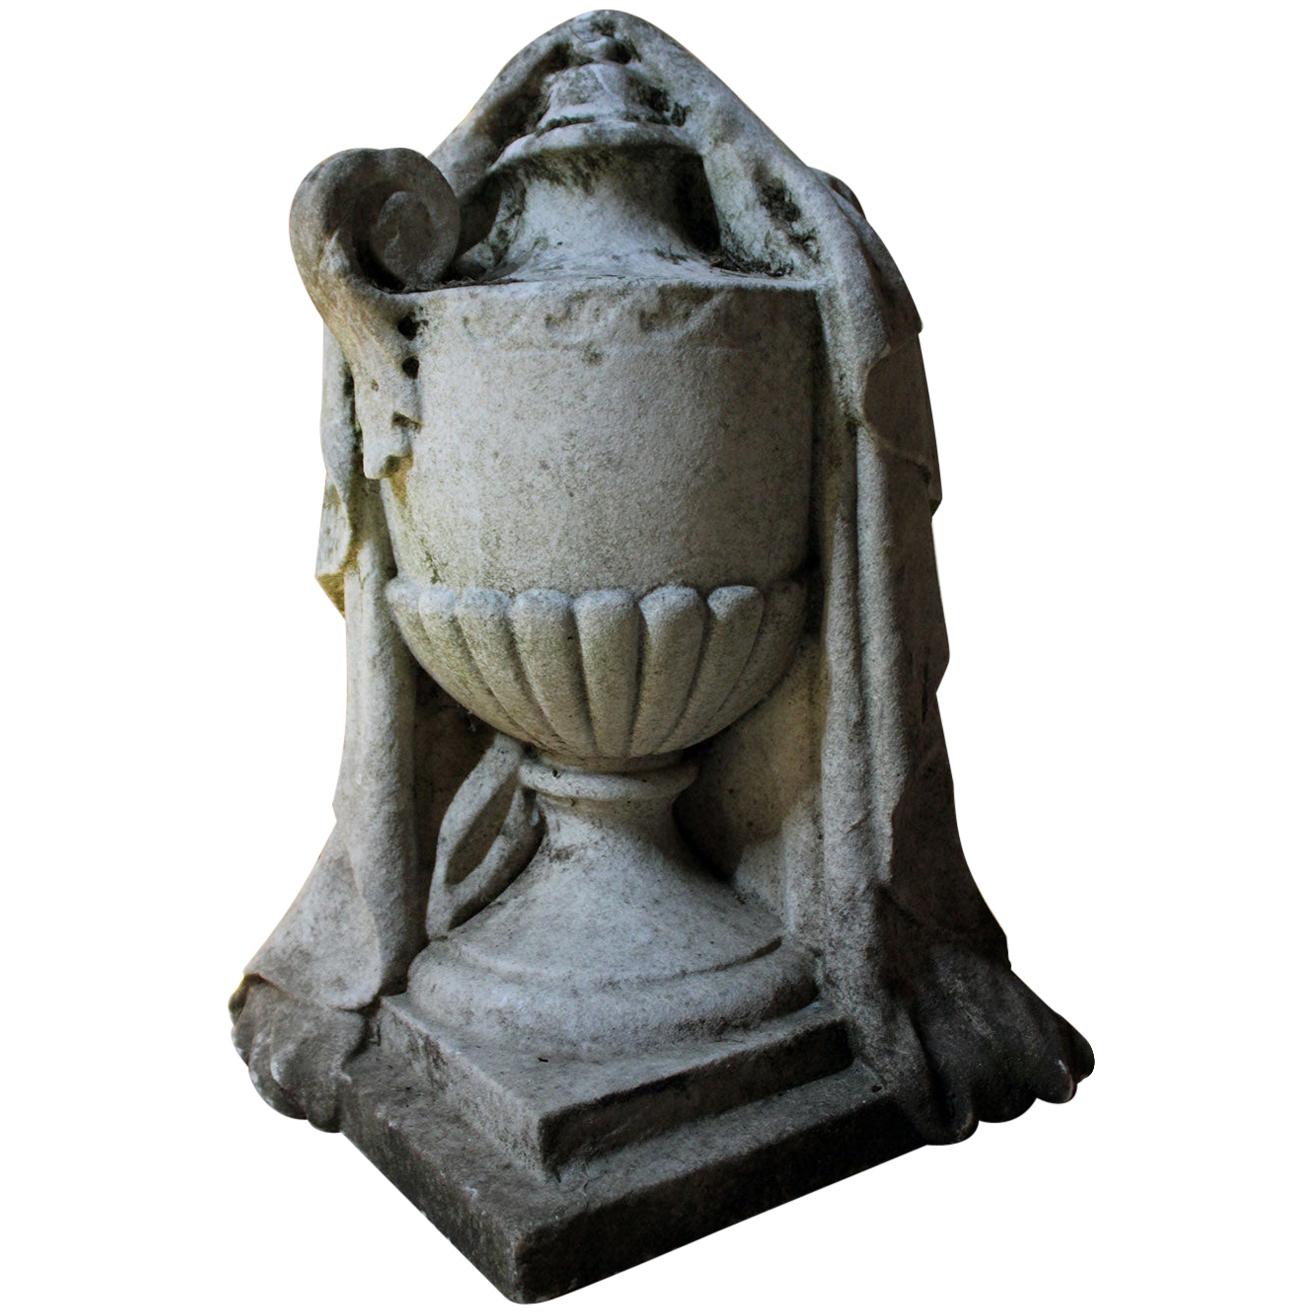 The fine and large and heavy solid white marble funerary monument carved in the round in the form of a classical urn carved with fluid flowing drapery, with one loop handle visible to a fluted conical body, to a square plinth base, the whole